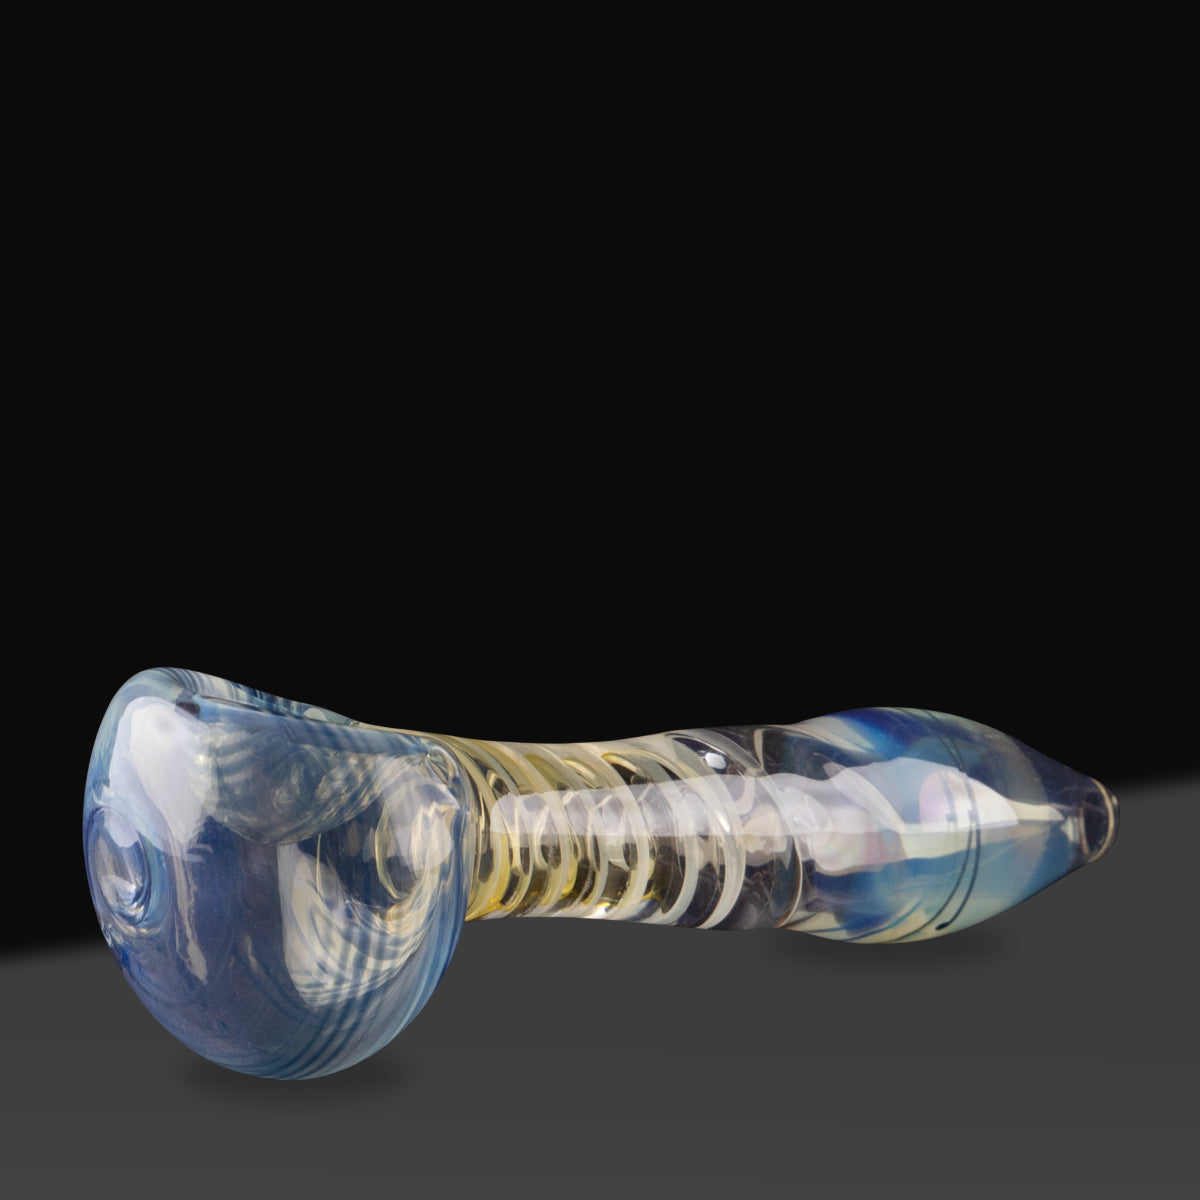 Hand Pipe | Peanut Glass Pipes | 2-4" - Glass - Various Styles